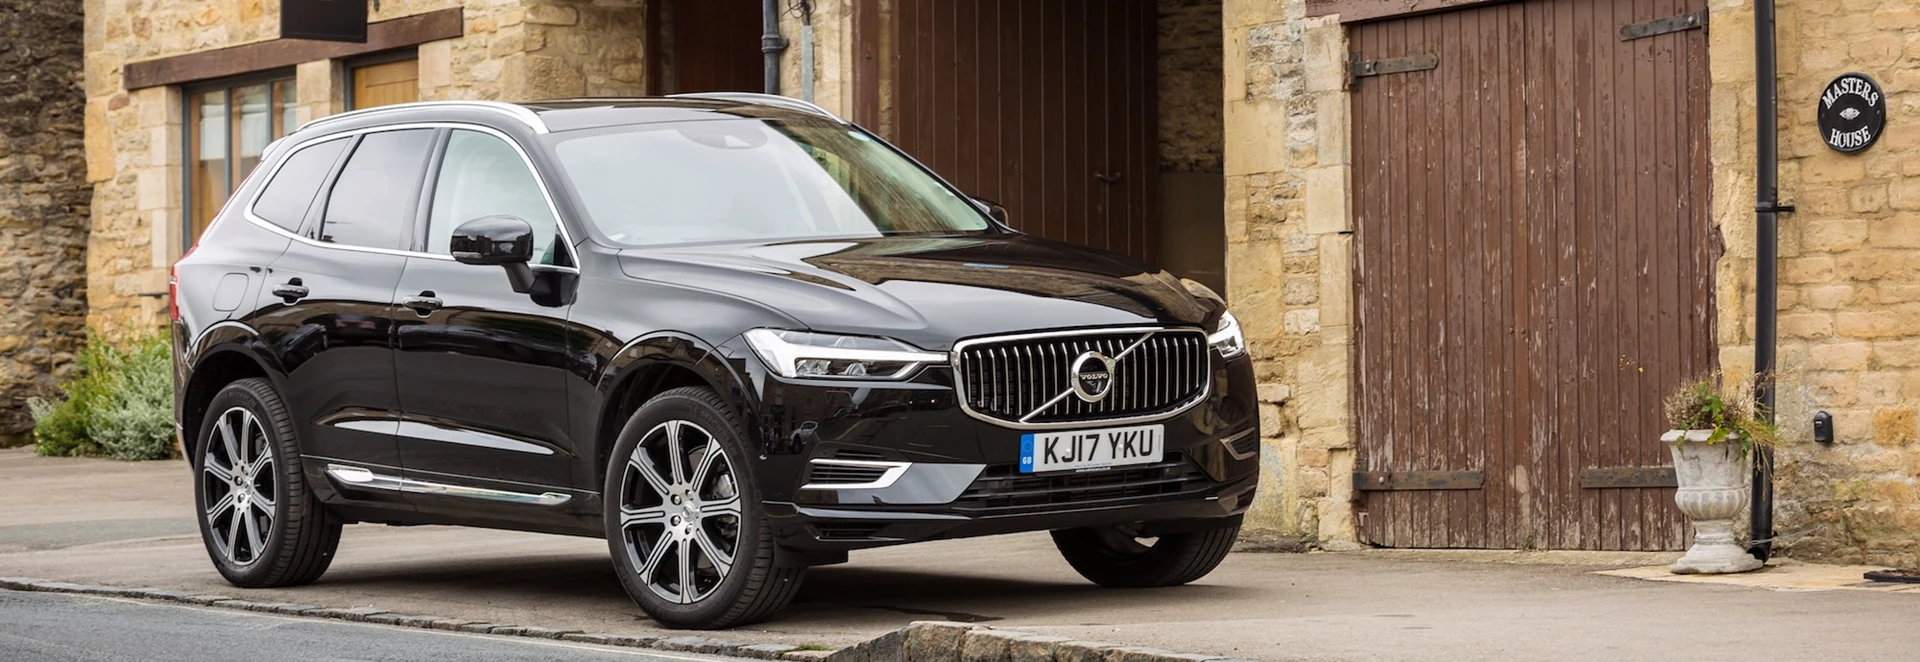 Here’s why the Volvo XC60 deserves Best Large SUV 2018 